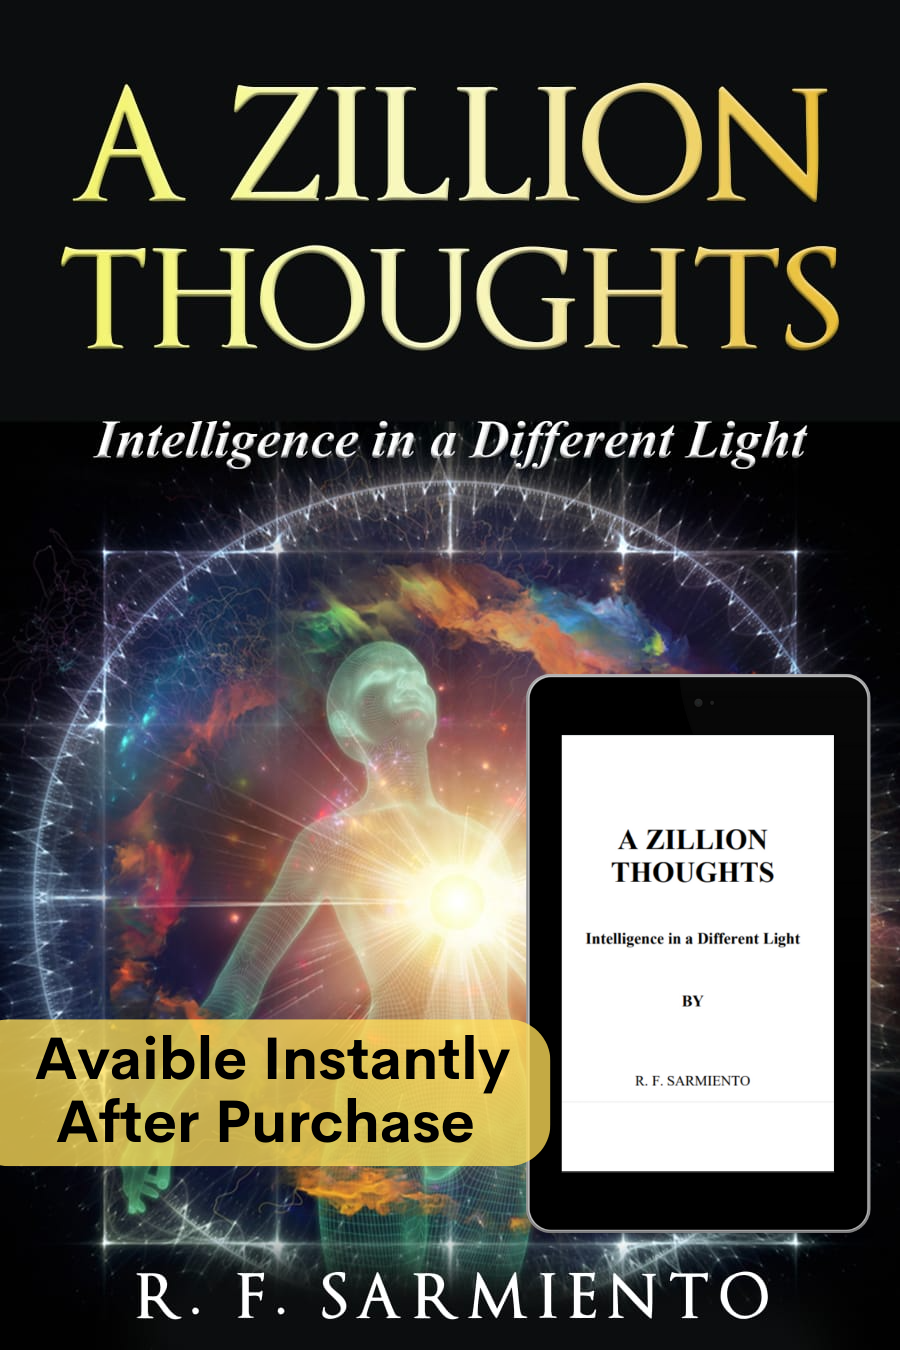 E-Book of A Zillion Thoughts: Intelligence in a Different Light